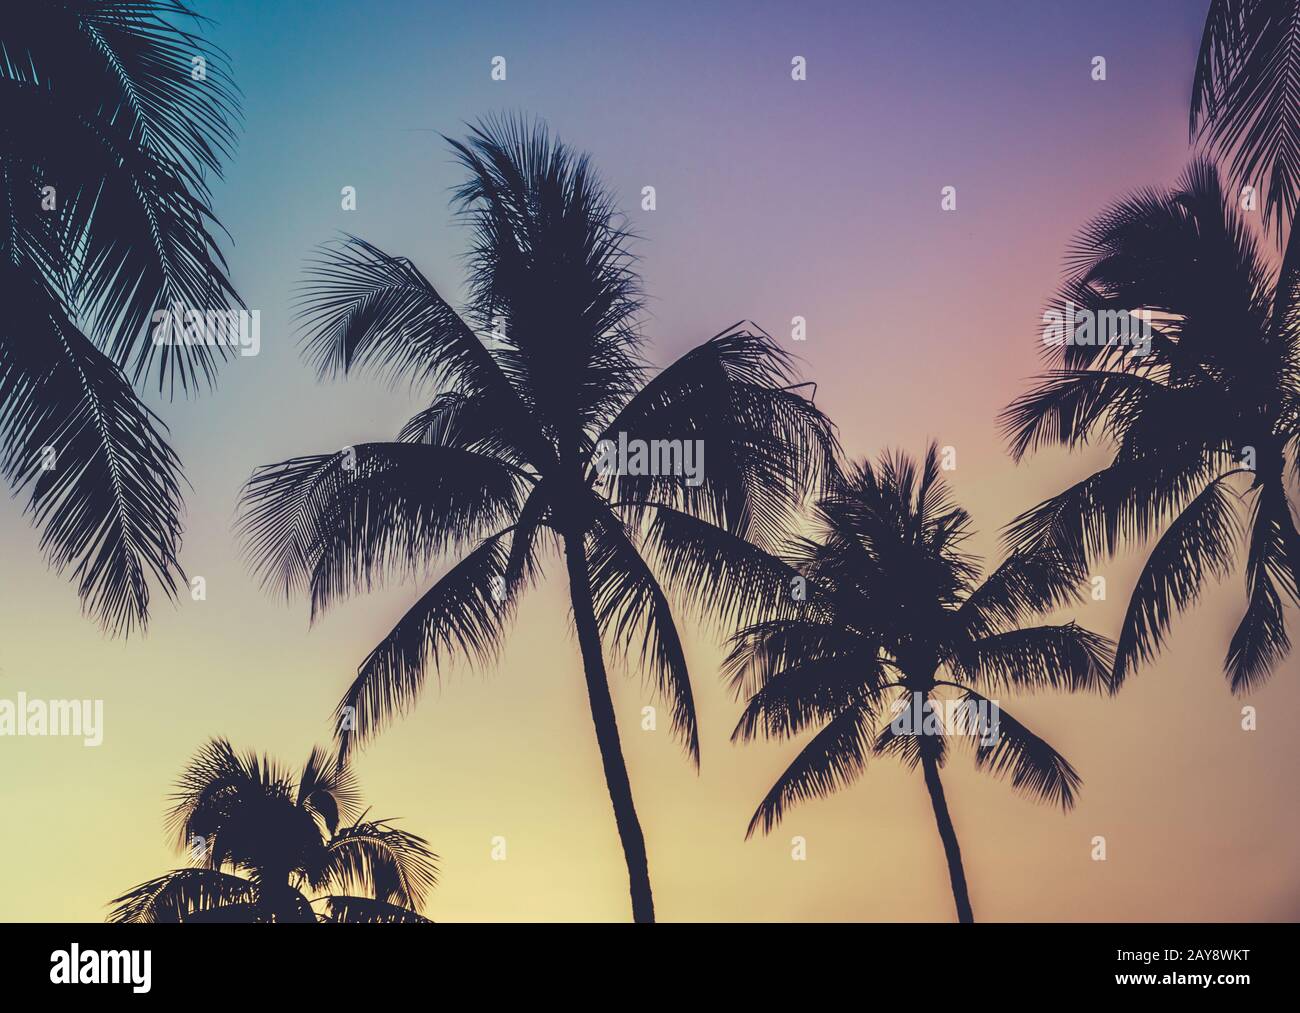 Retro Style Hawaii Sunset Palm Trees With Vibrant Colors Stock Photo